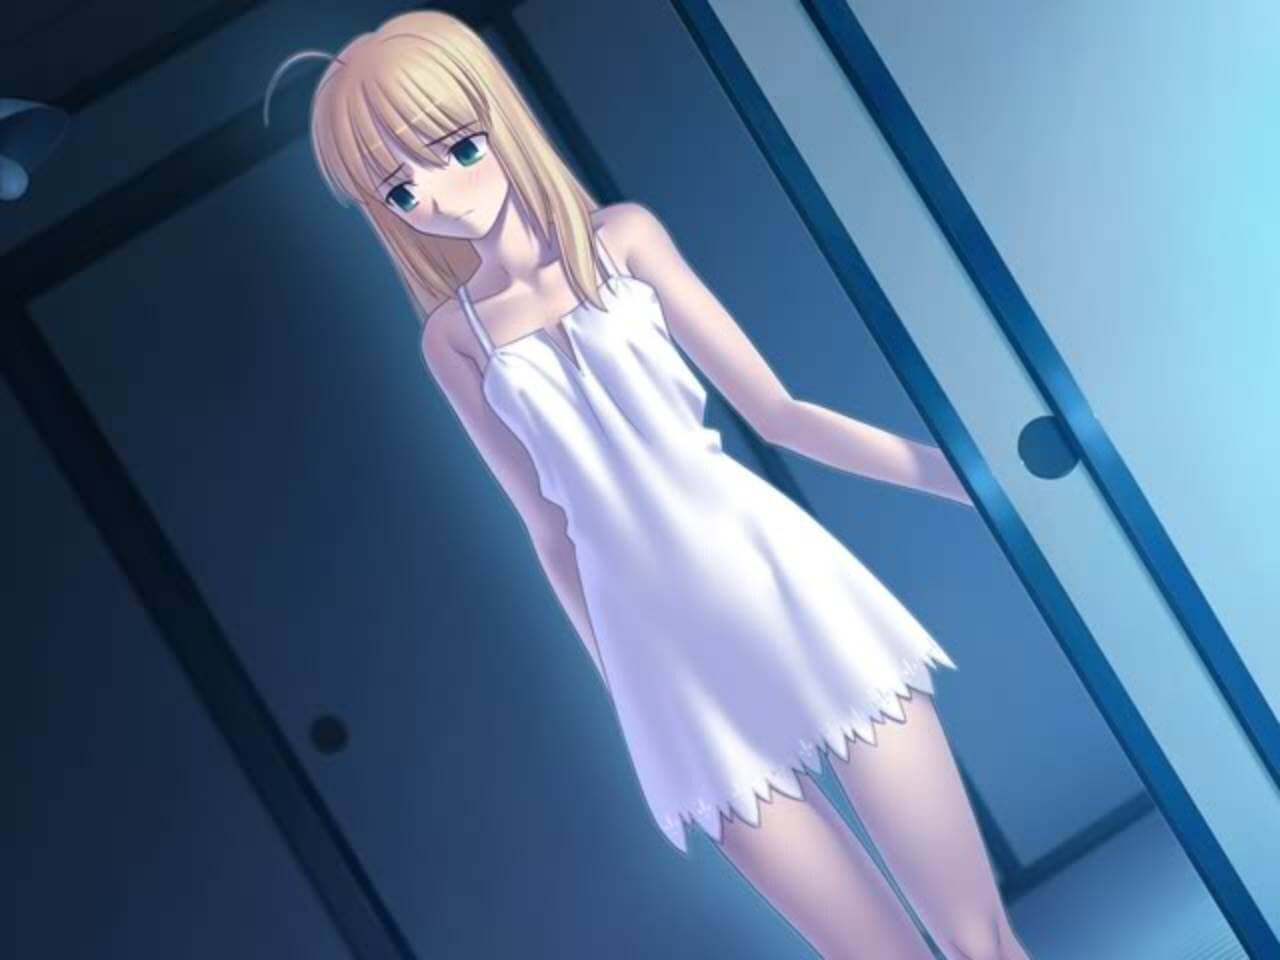 Drown Yourself in Love With These 5 Eroge Recommendations!